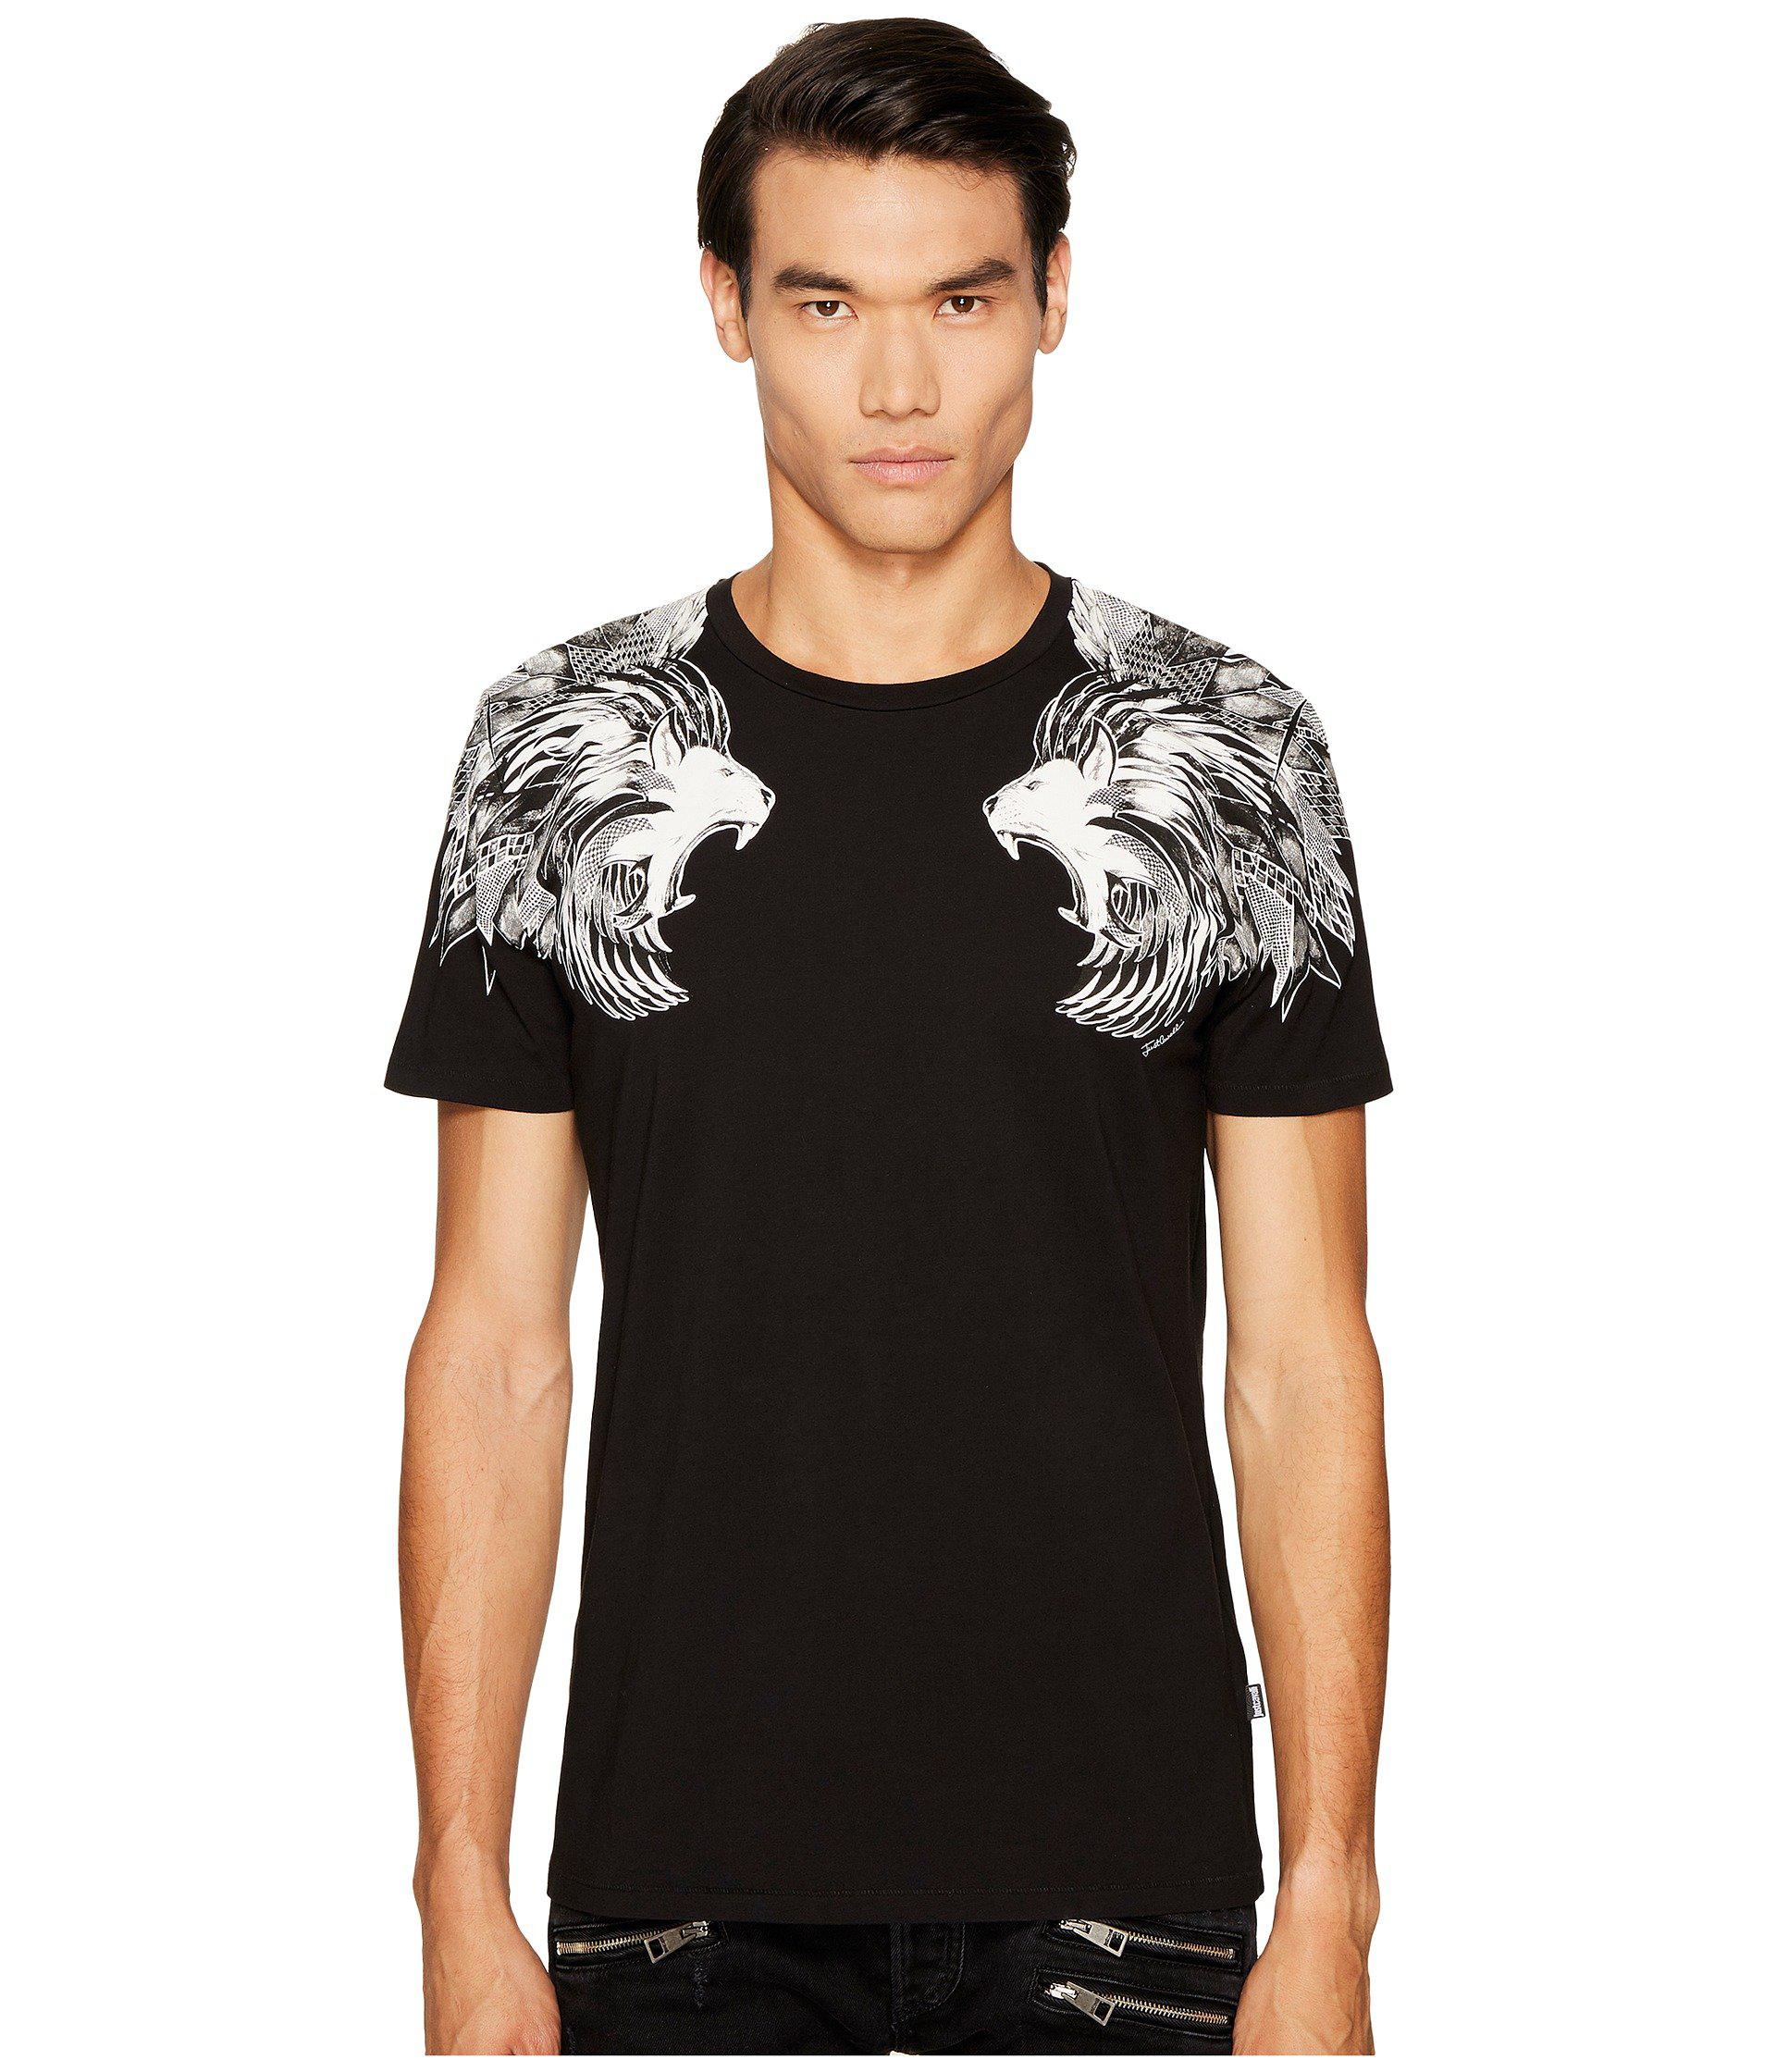 Lyst - Just Cavalli Lions T-shirt in Black for Men